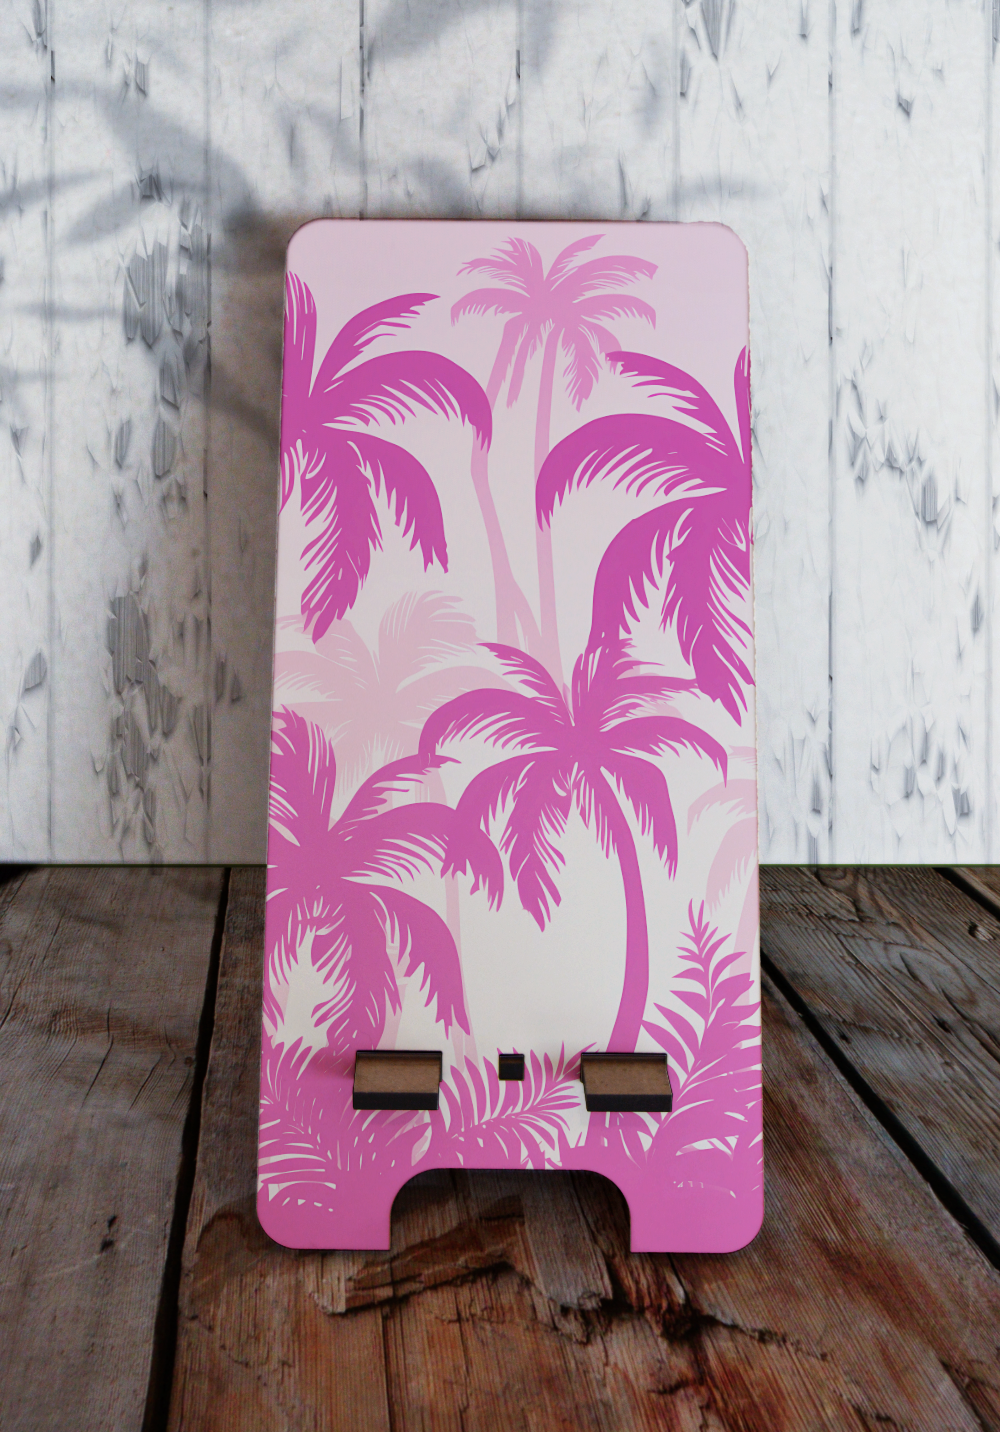 Phone stand (small) - Pink palm trees